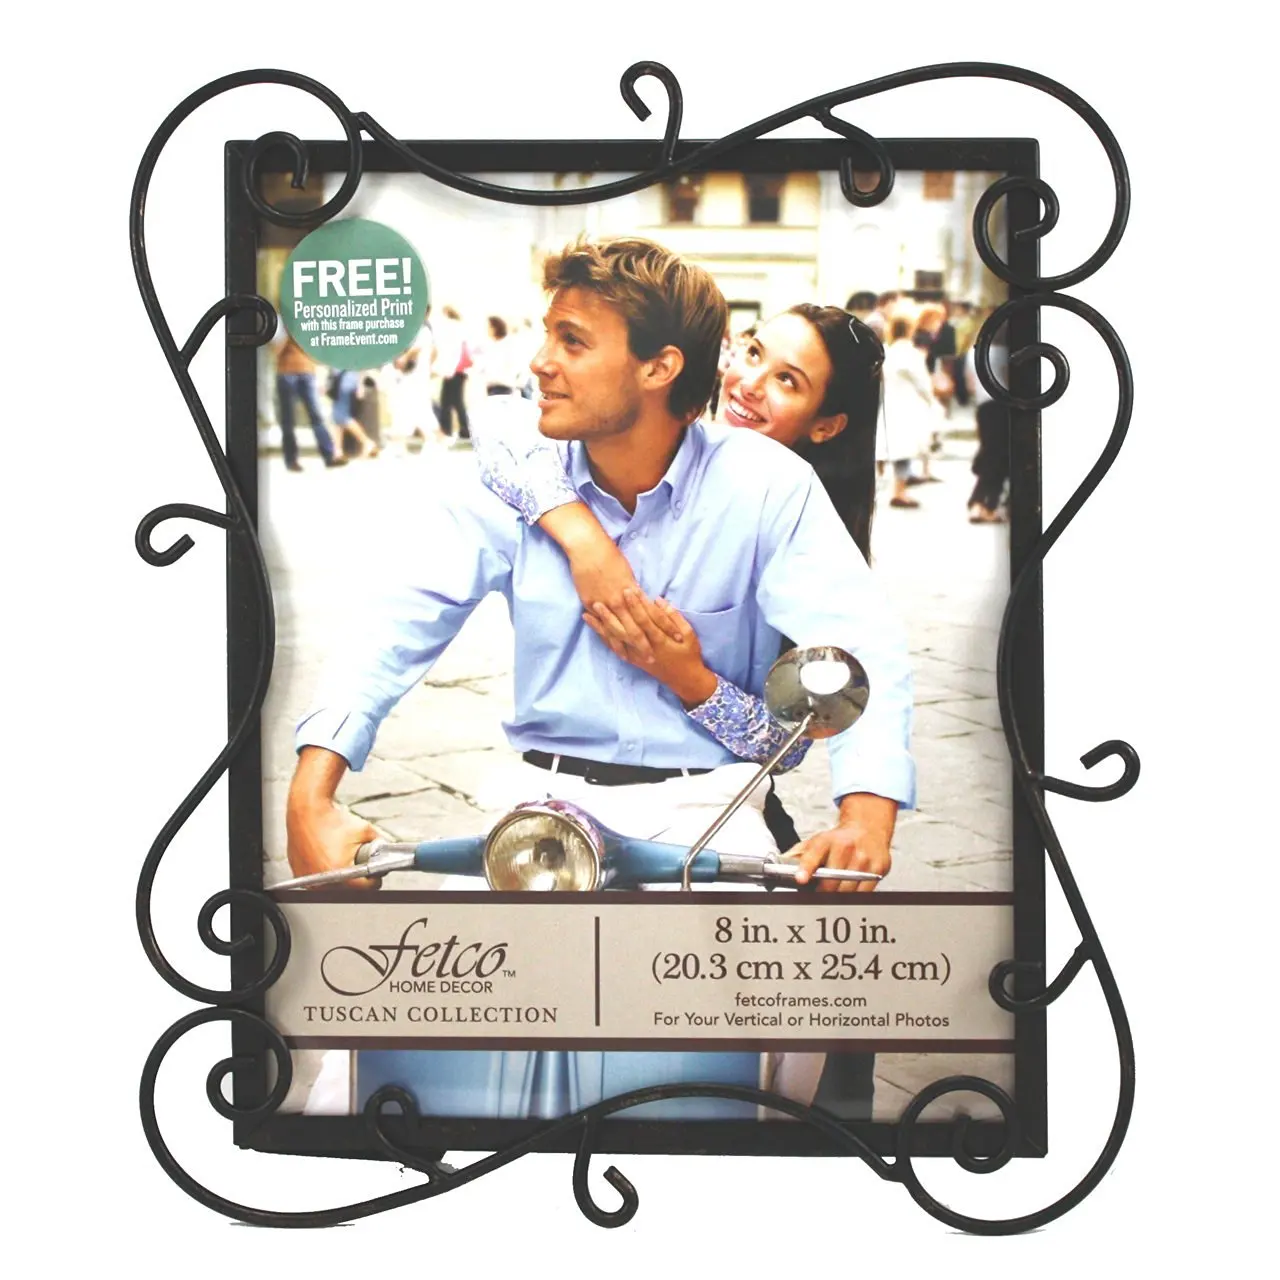 Fetco Home Decor Picture Frames / Home Kitchen Wall Tabletop Frames Neutral Fetco Home Decor F78165d06c Wall Frame - Fetco home decor tuscan alton corner scroll picture frame the series of the photo frames made of wrought iron.